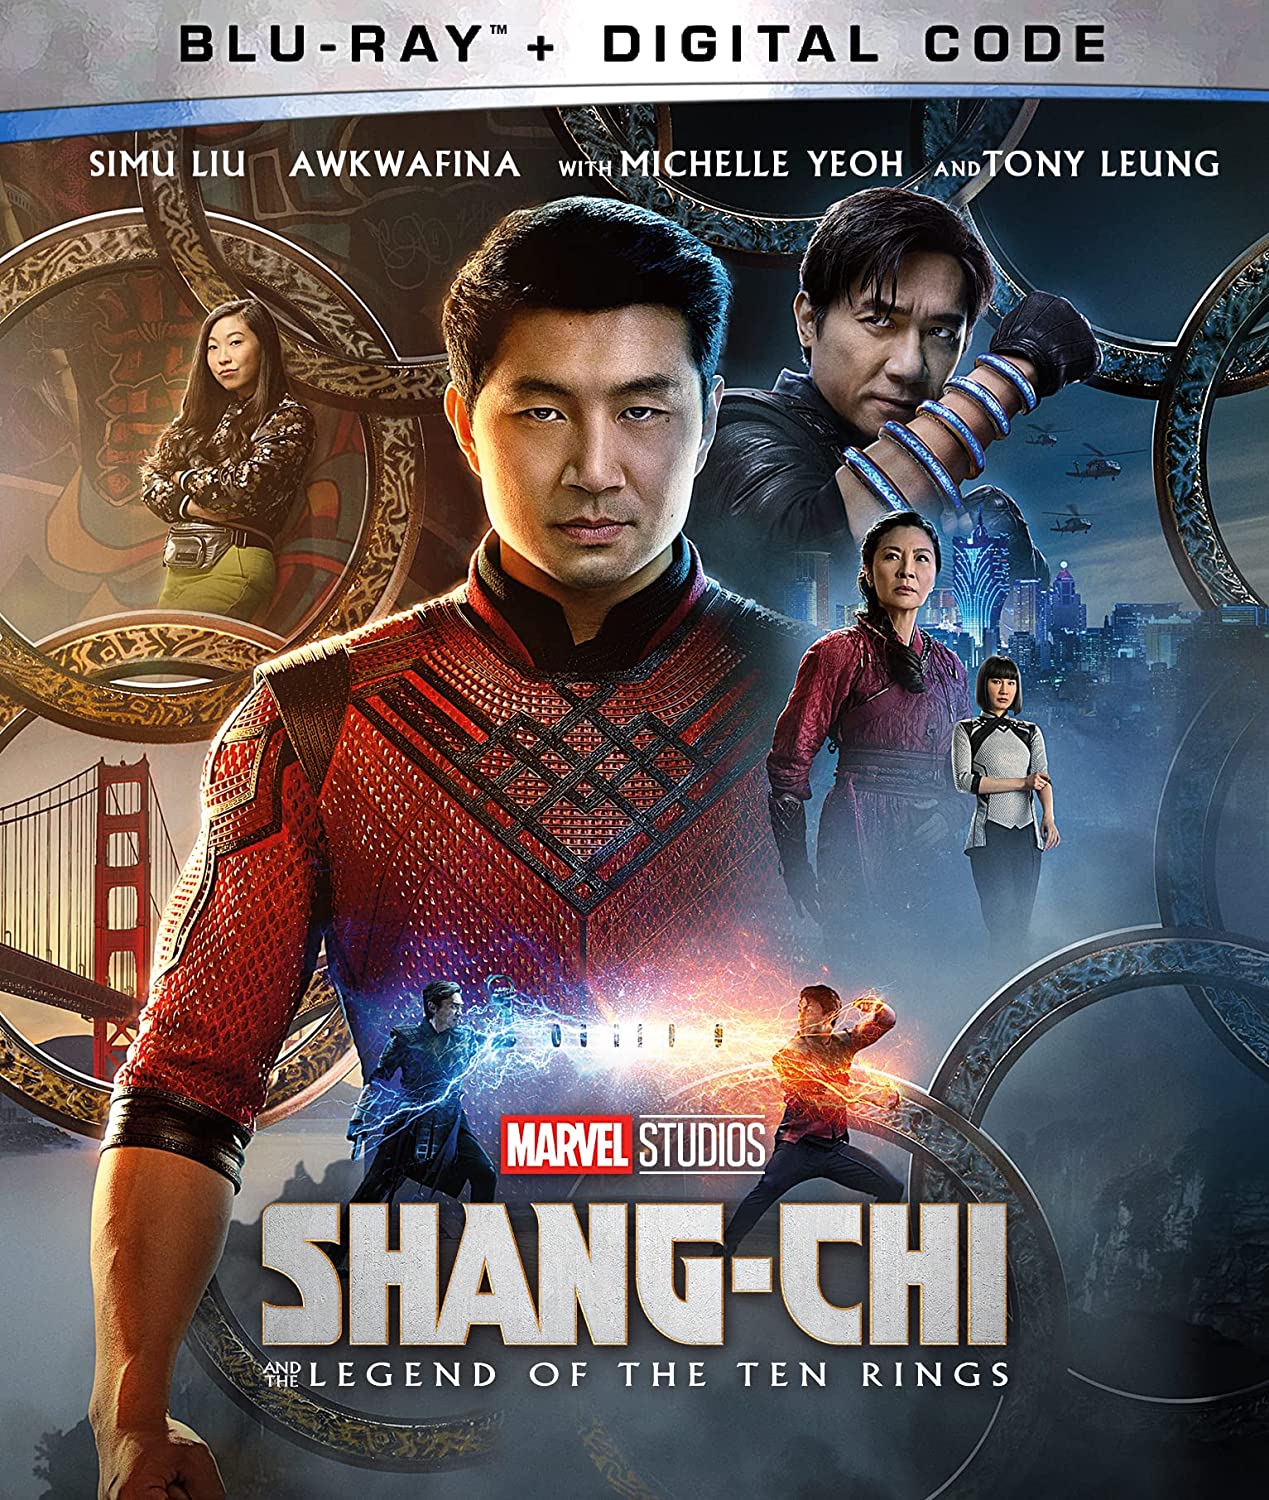 Shang-Chi and the Legend of the Ten Rings Blu-ray